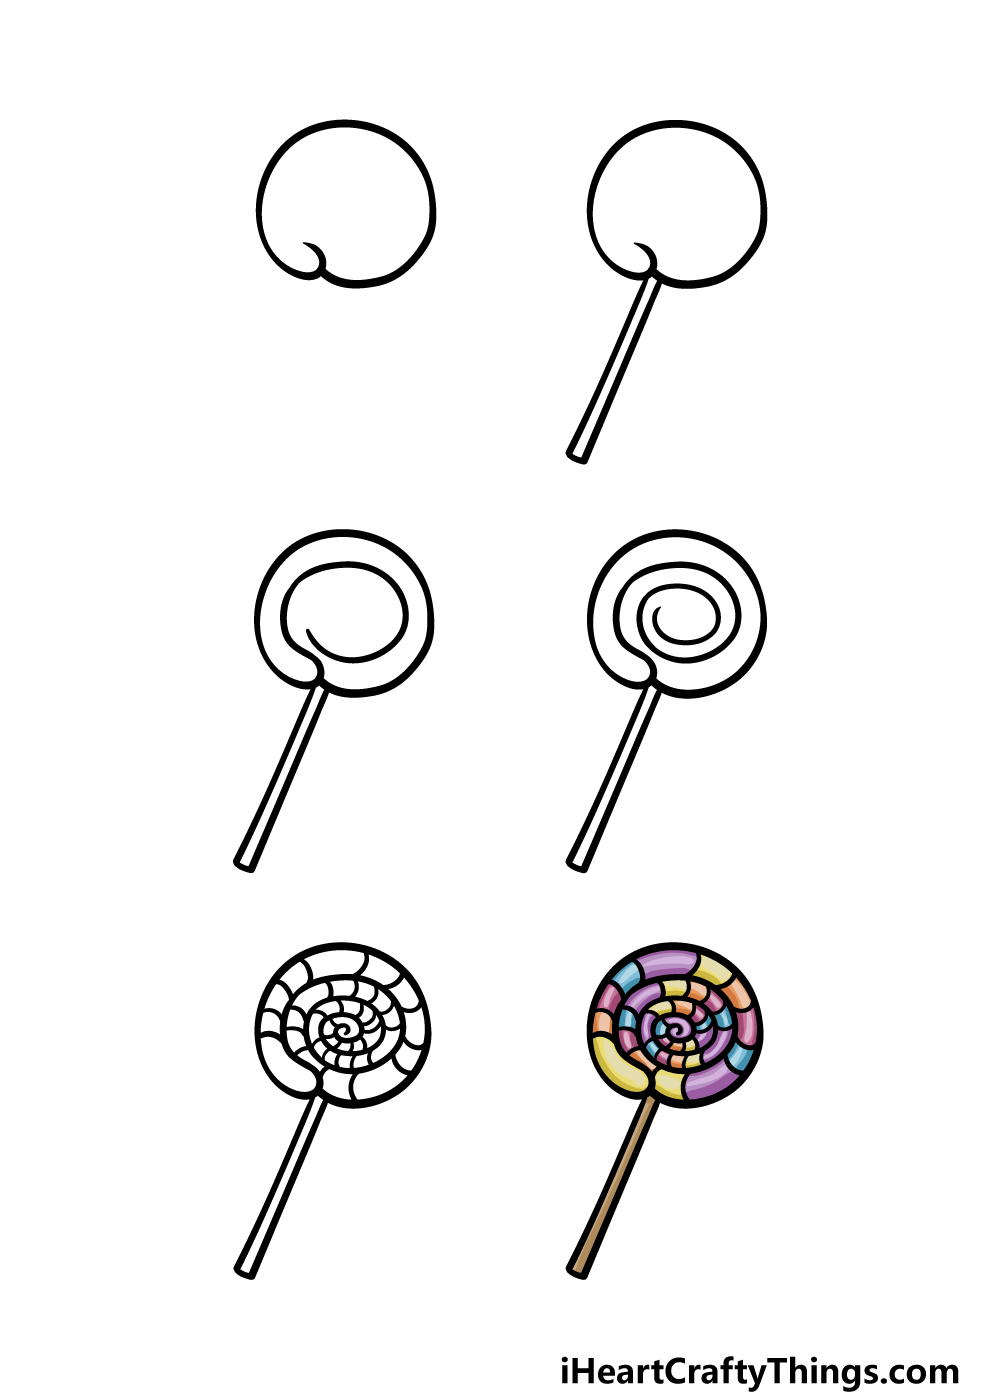 how to draw a lollipop in 6 steps